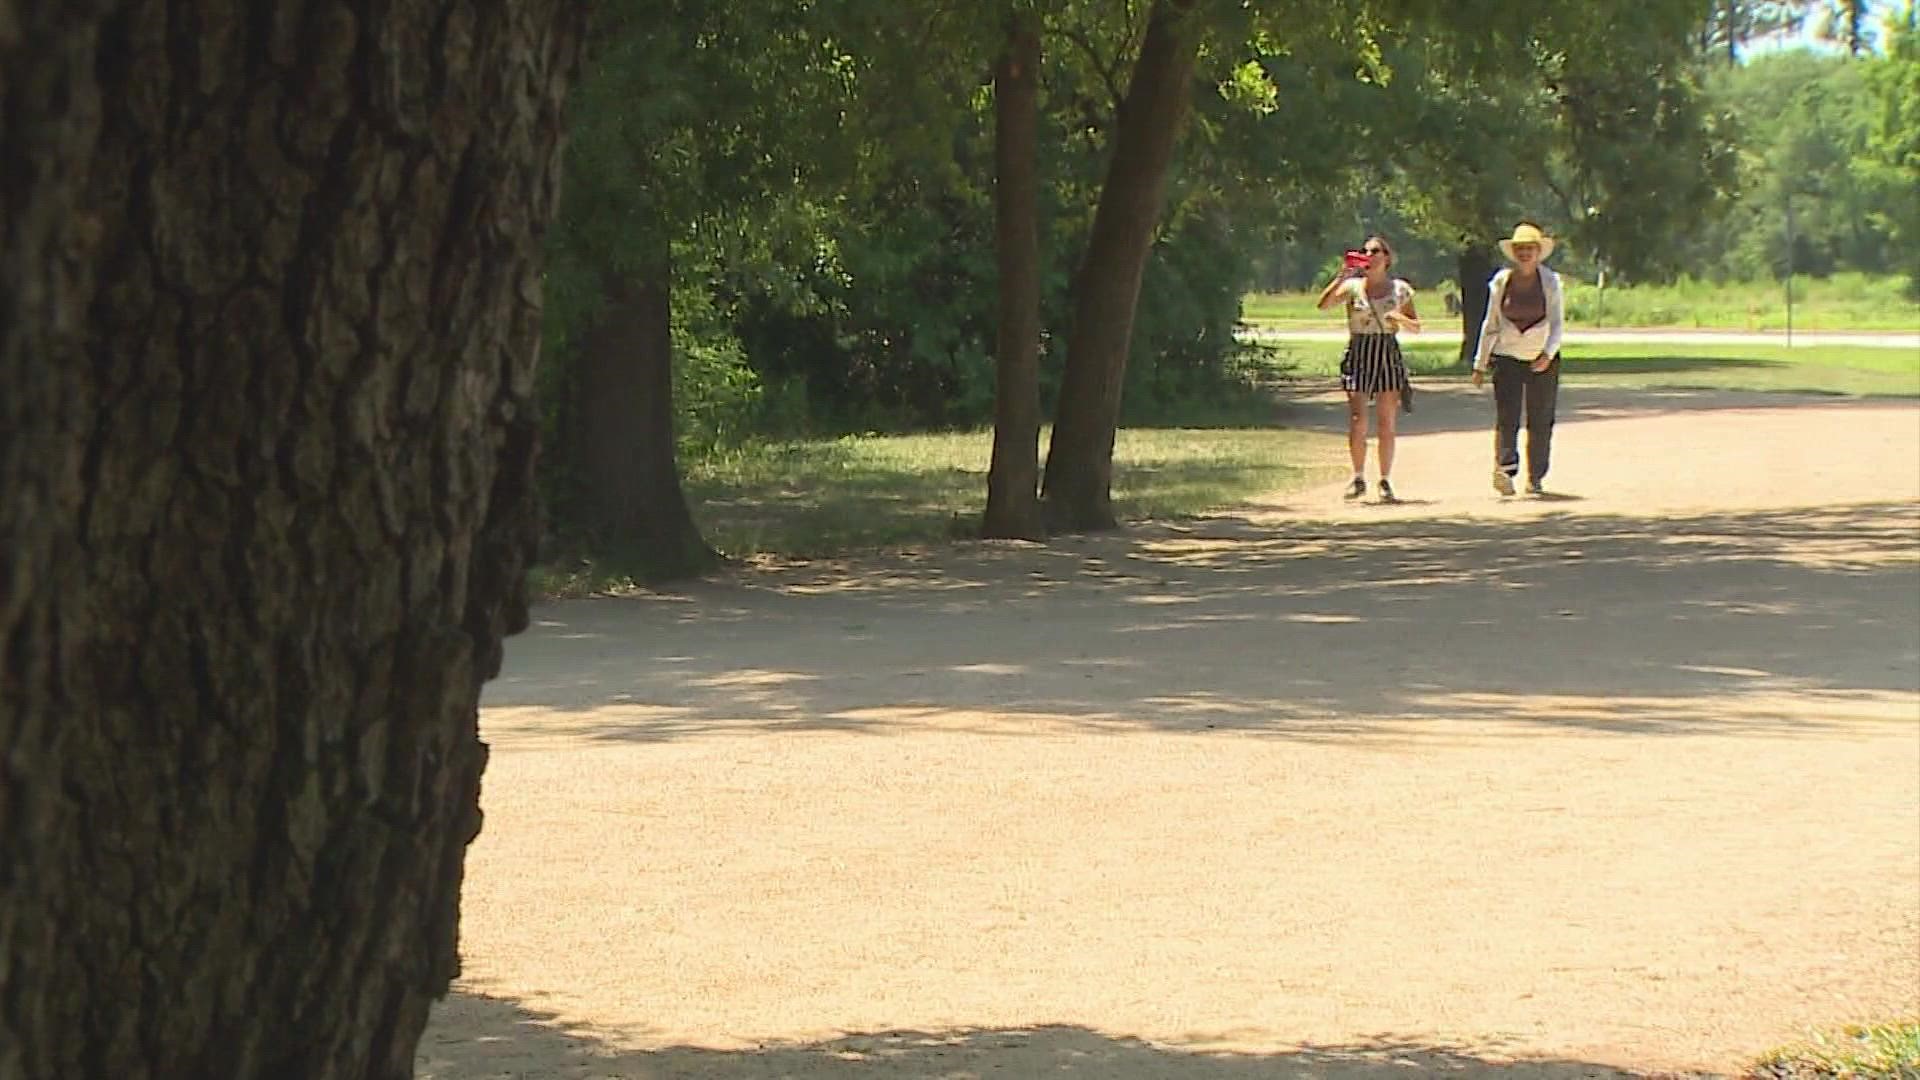 The Houston area is looking at the potential of three straight days of 100-degree temperatures this weekend, the highest they’ve been since August 2020.